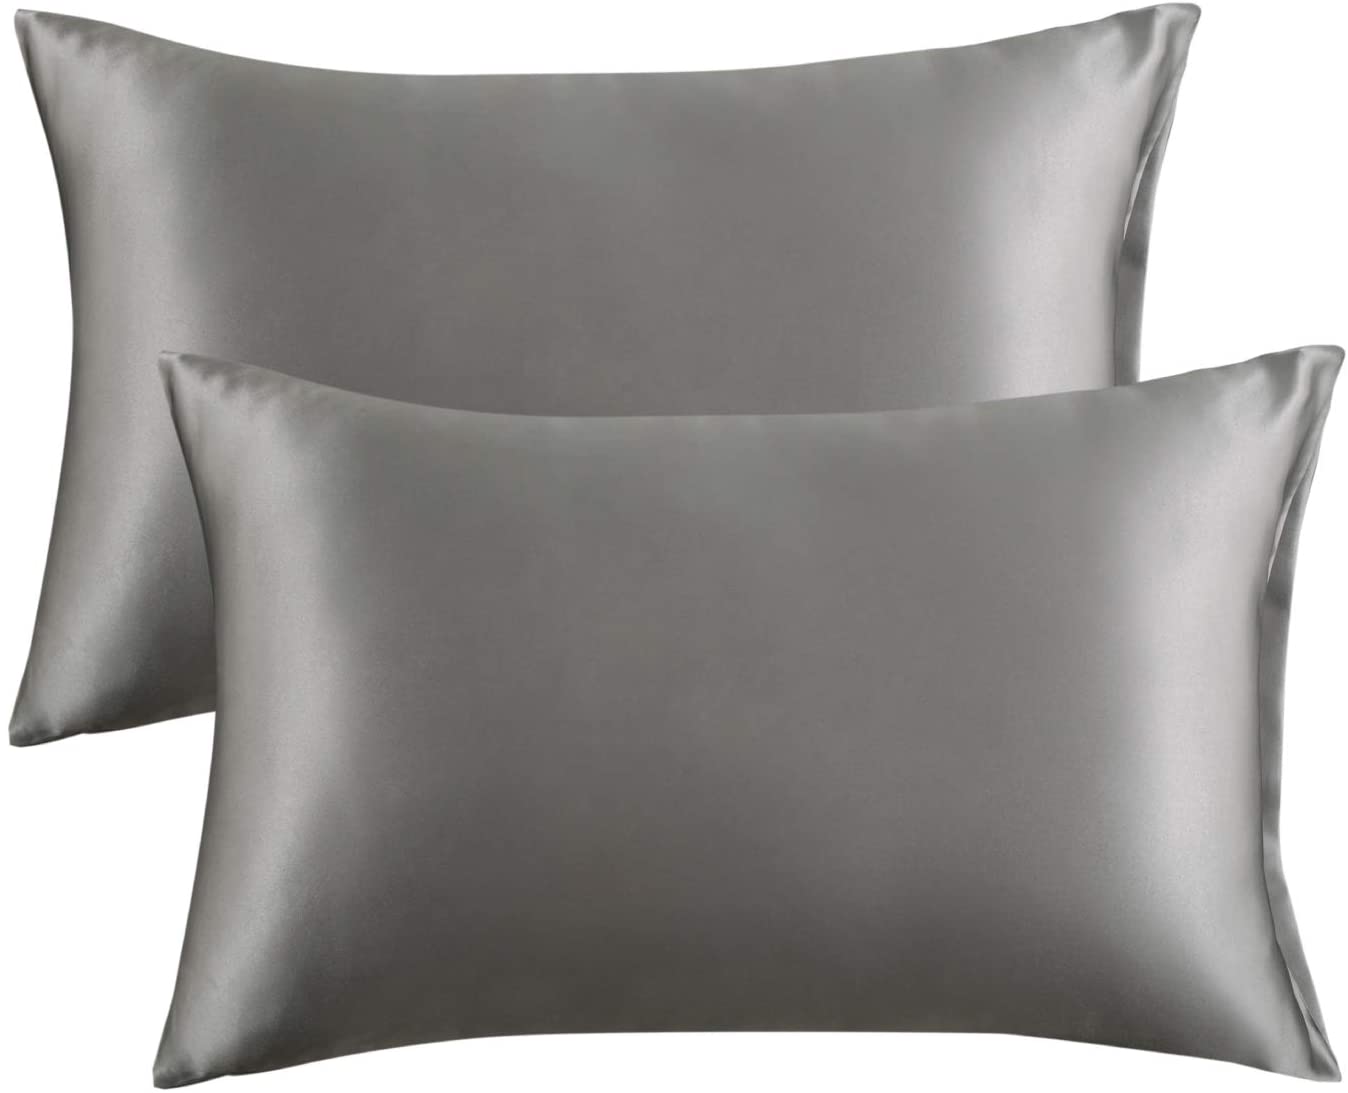 Details about   Set of 2 Satin Silk Pillowcase Pillow Case Cover Queen Standard Cushion Cover US 